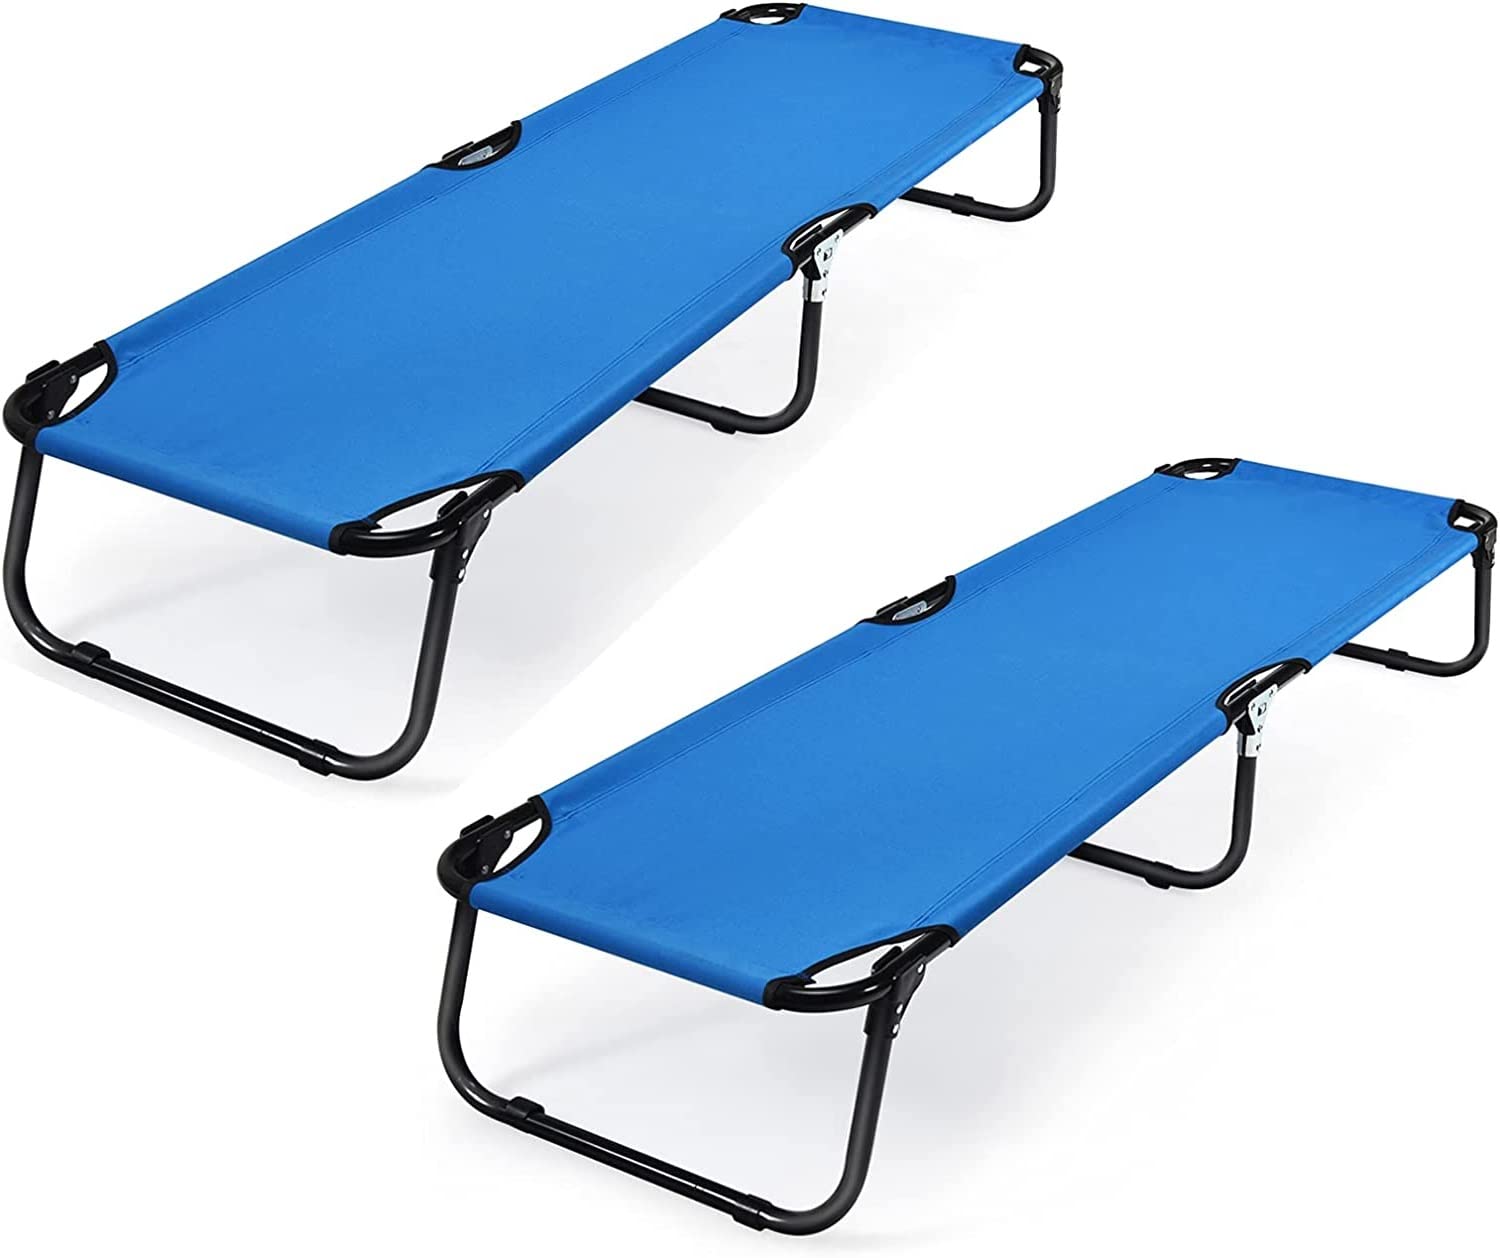 COSTWAY 2 PCS Folding Camping Bed Outdoor Portable Military Cot Sleeping Hiking Travel Blue